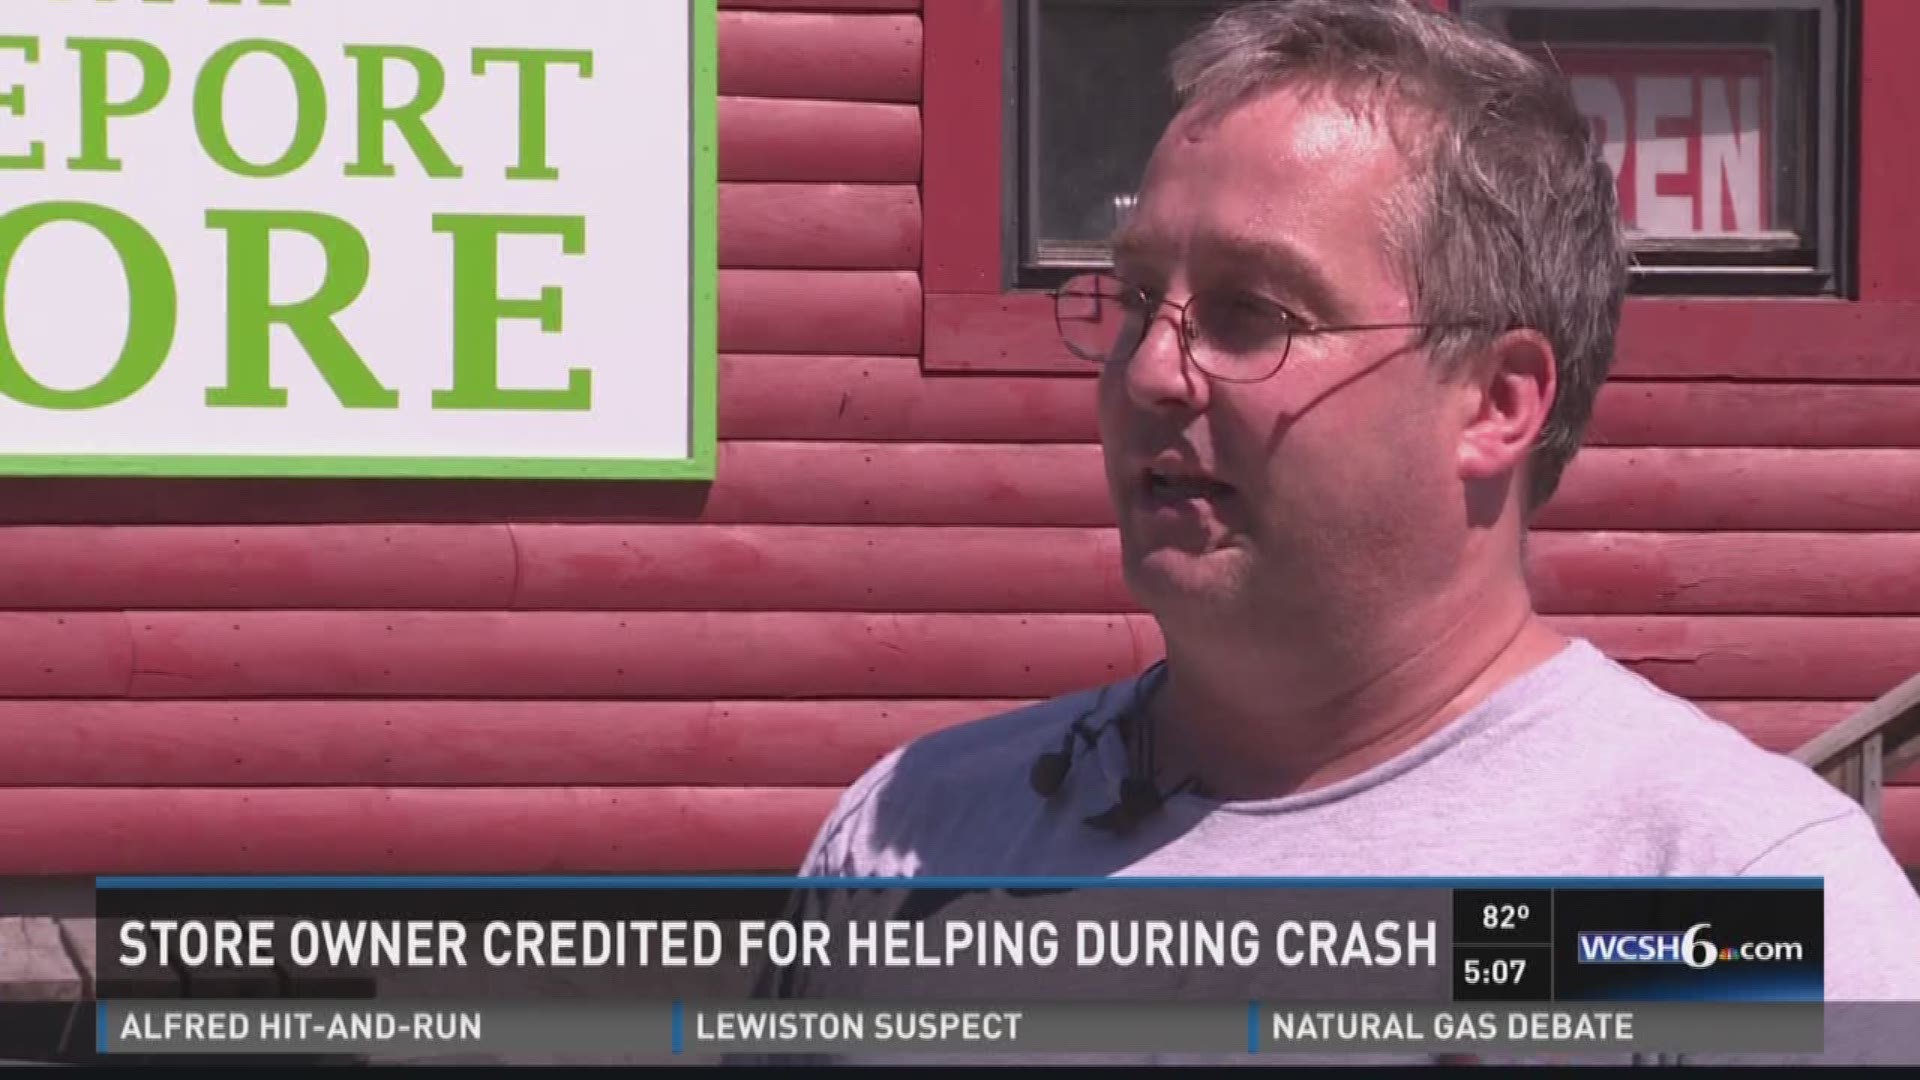 Store owner credited for helping during crash